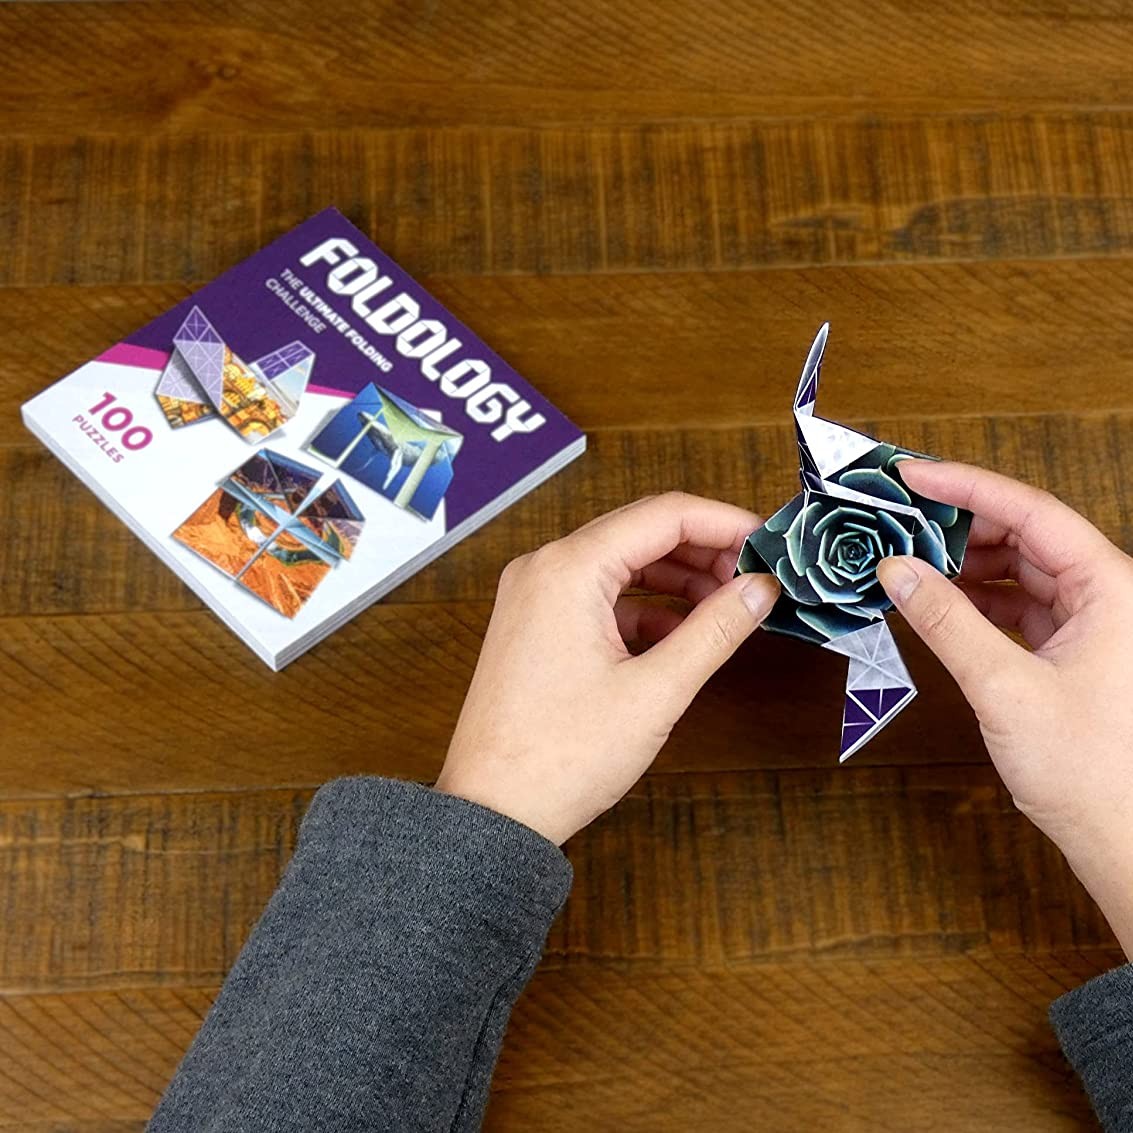 A origami puzzle game called Foldology, a pair of hands is shown attempting to complete one of the puzzles.